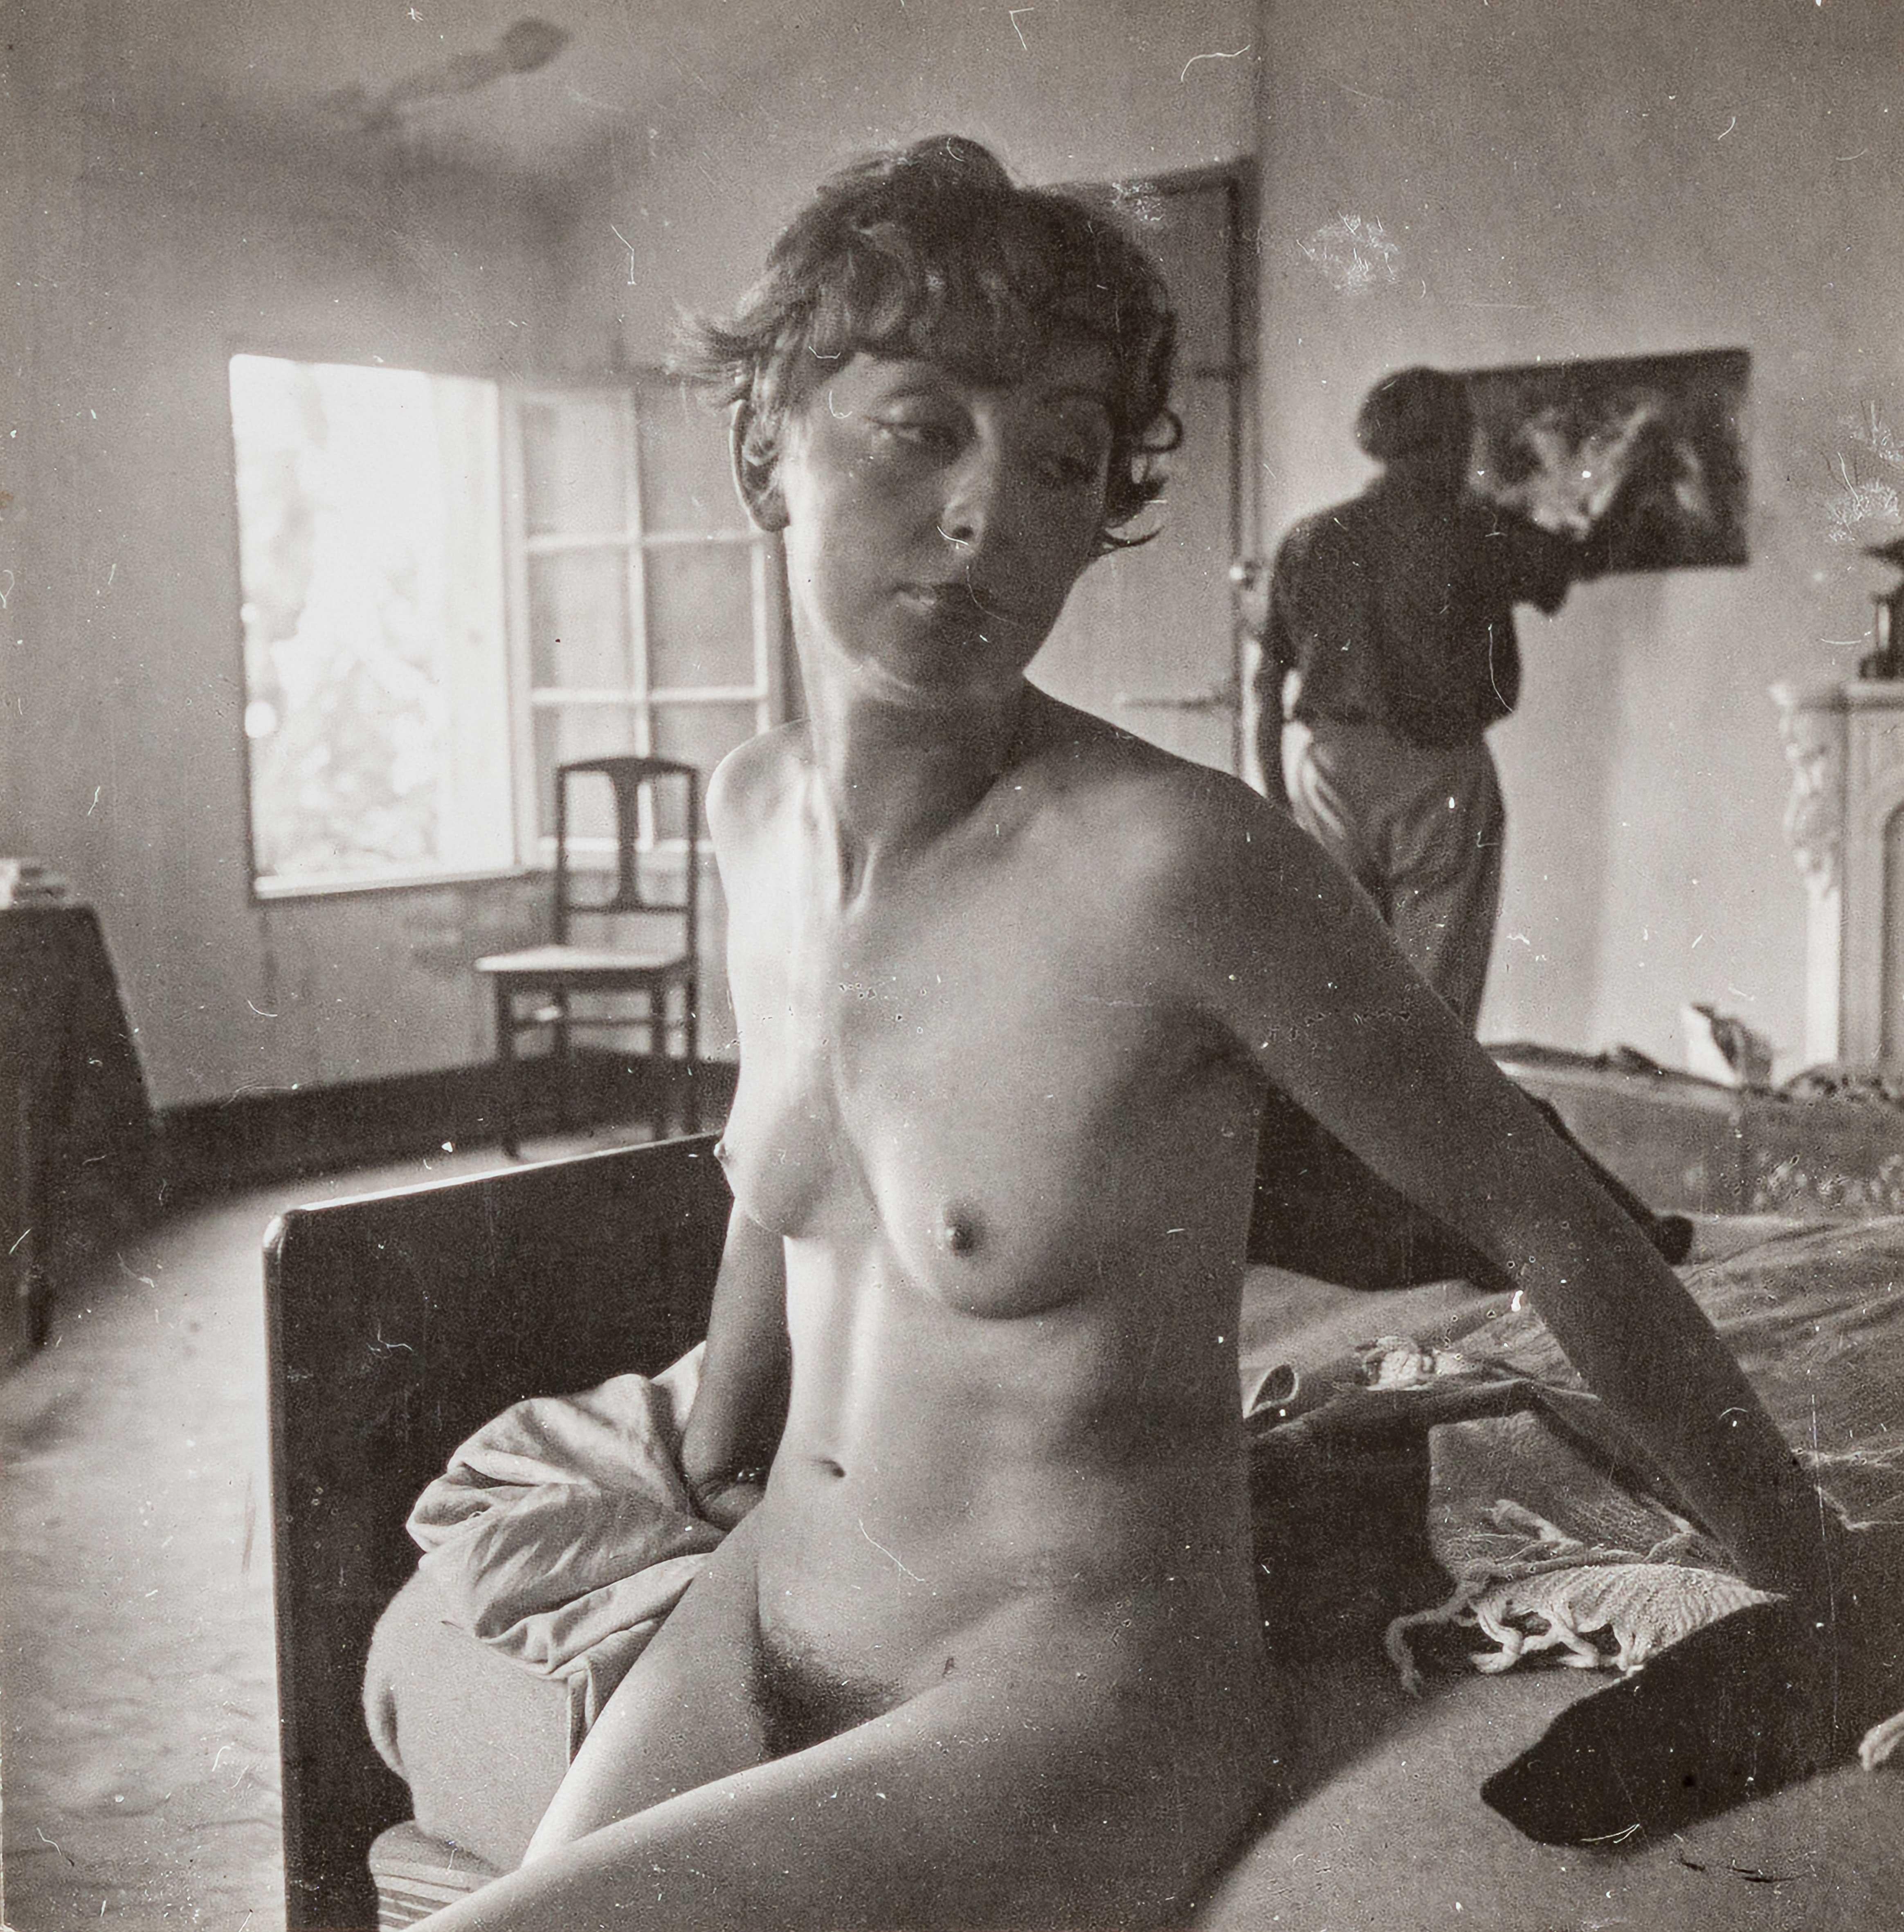 Dora Maar Black and White Photograph - Rosemunde Wilms with Pablo Picasso Painting in the Background in his Room